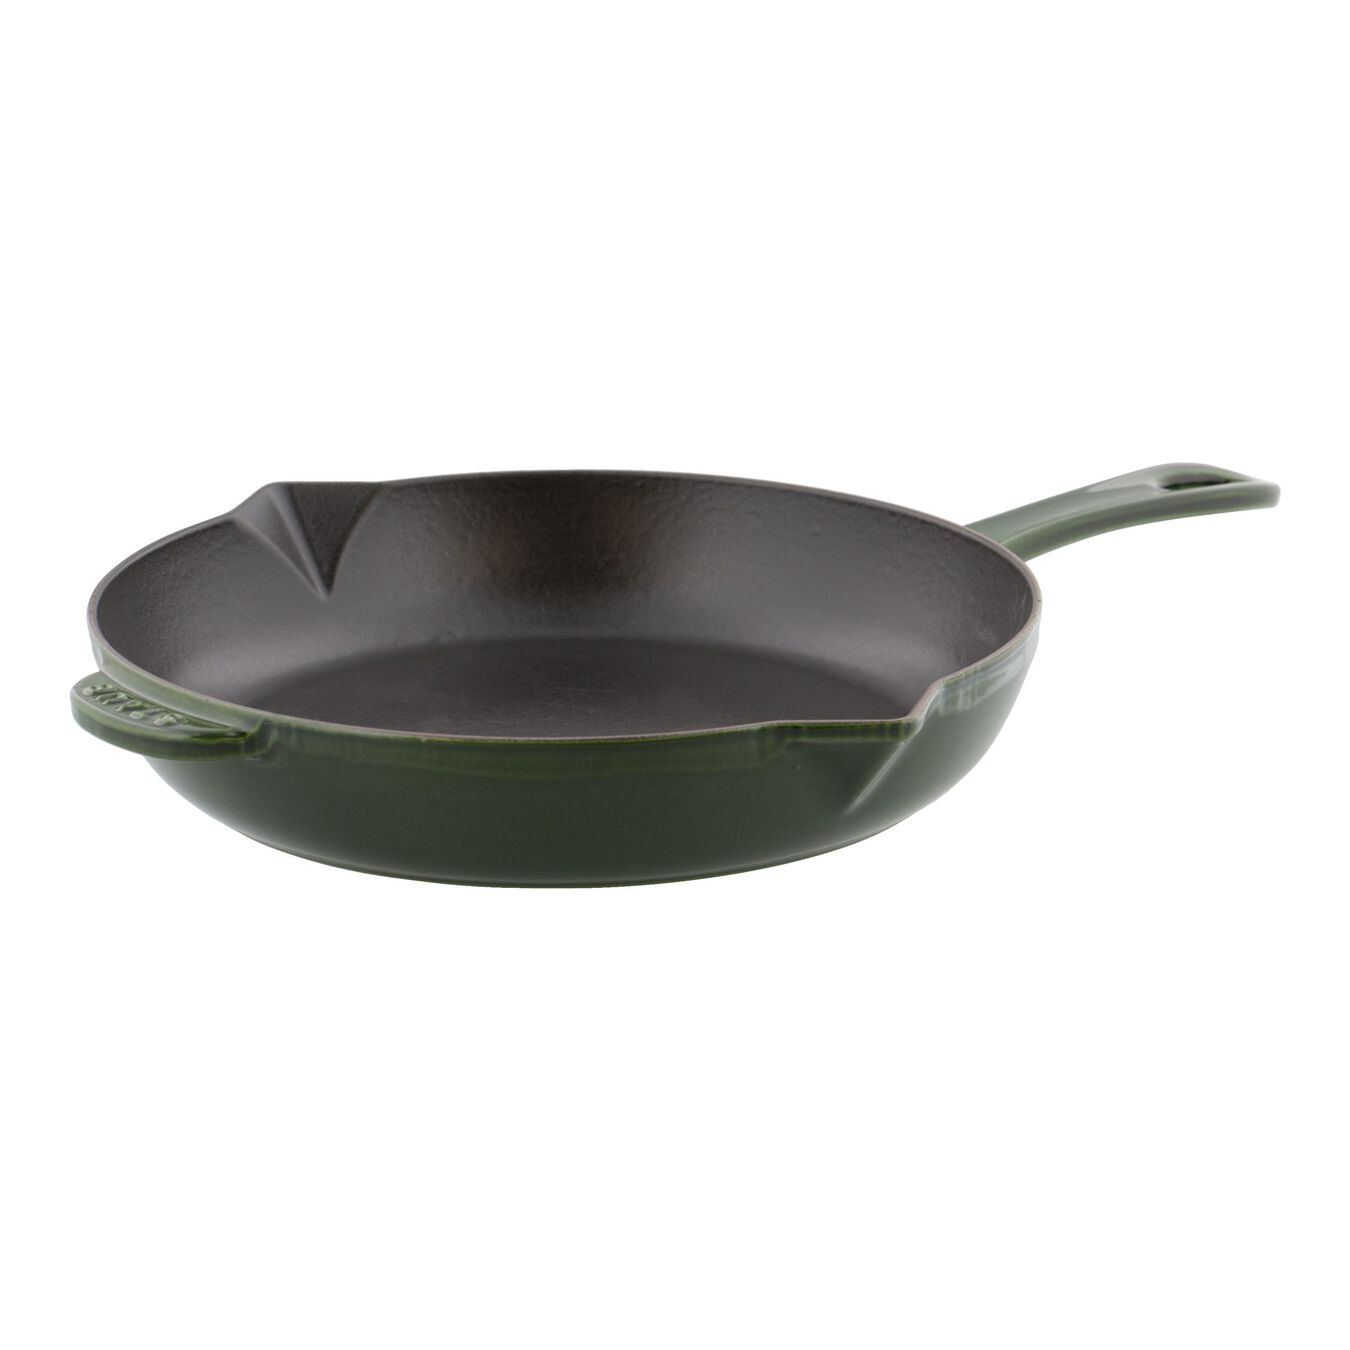 26 cm / 10 inch cast iron Frying pan, basil-green - Visual Imperfections,,large 1